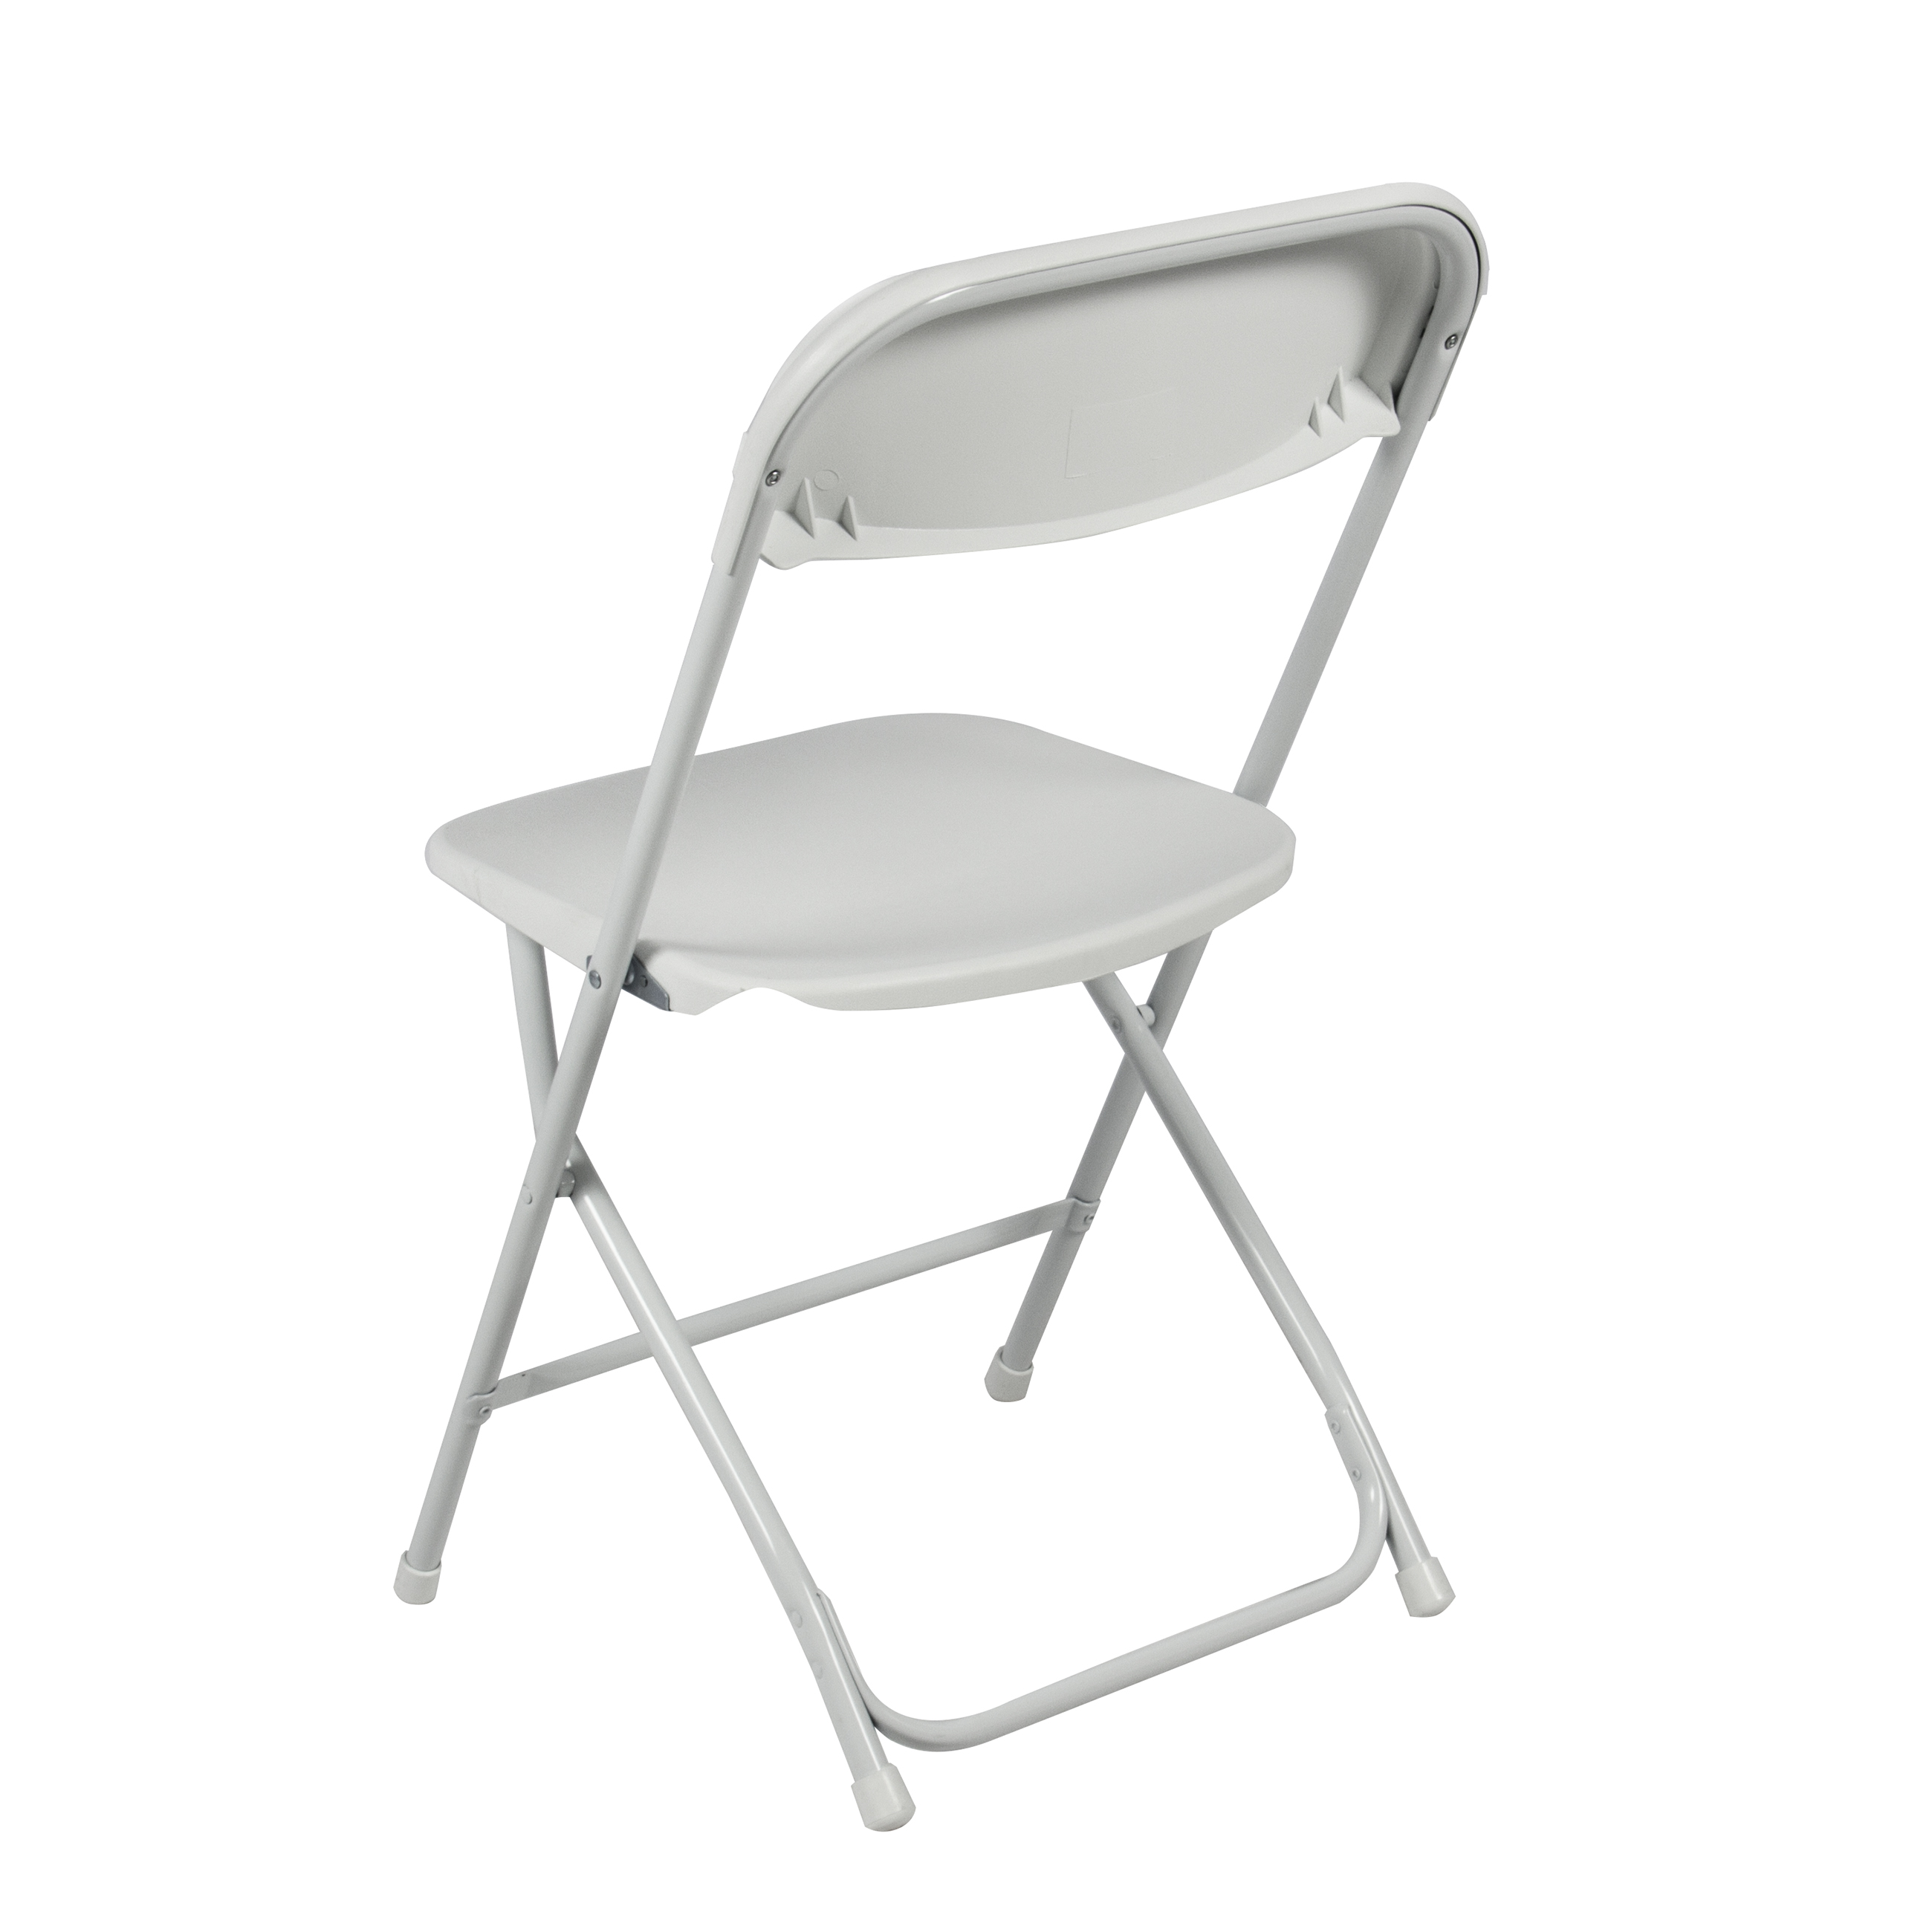 Cozy (5) Commercial White Plastic Folding Chairs Stackable Wedding Party Event  Chair plastic folding chairs